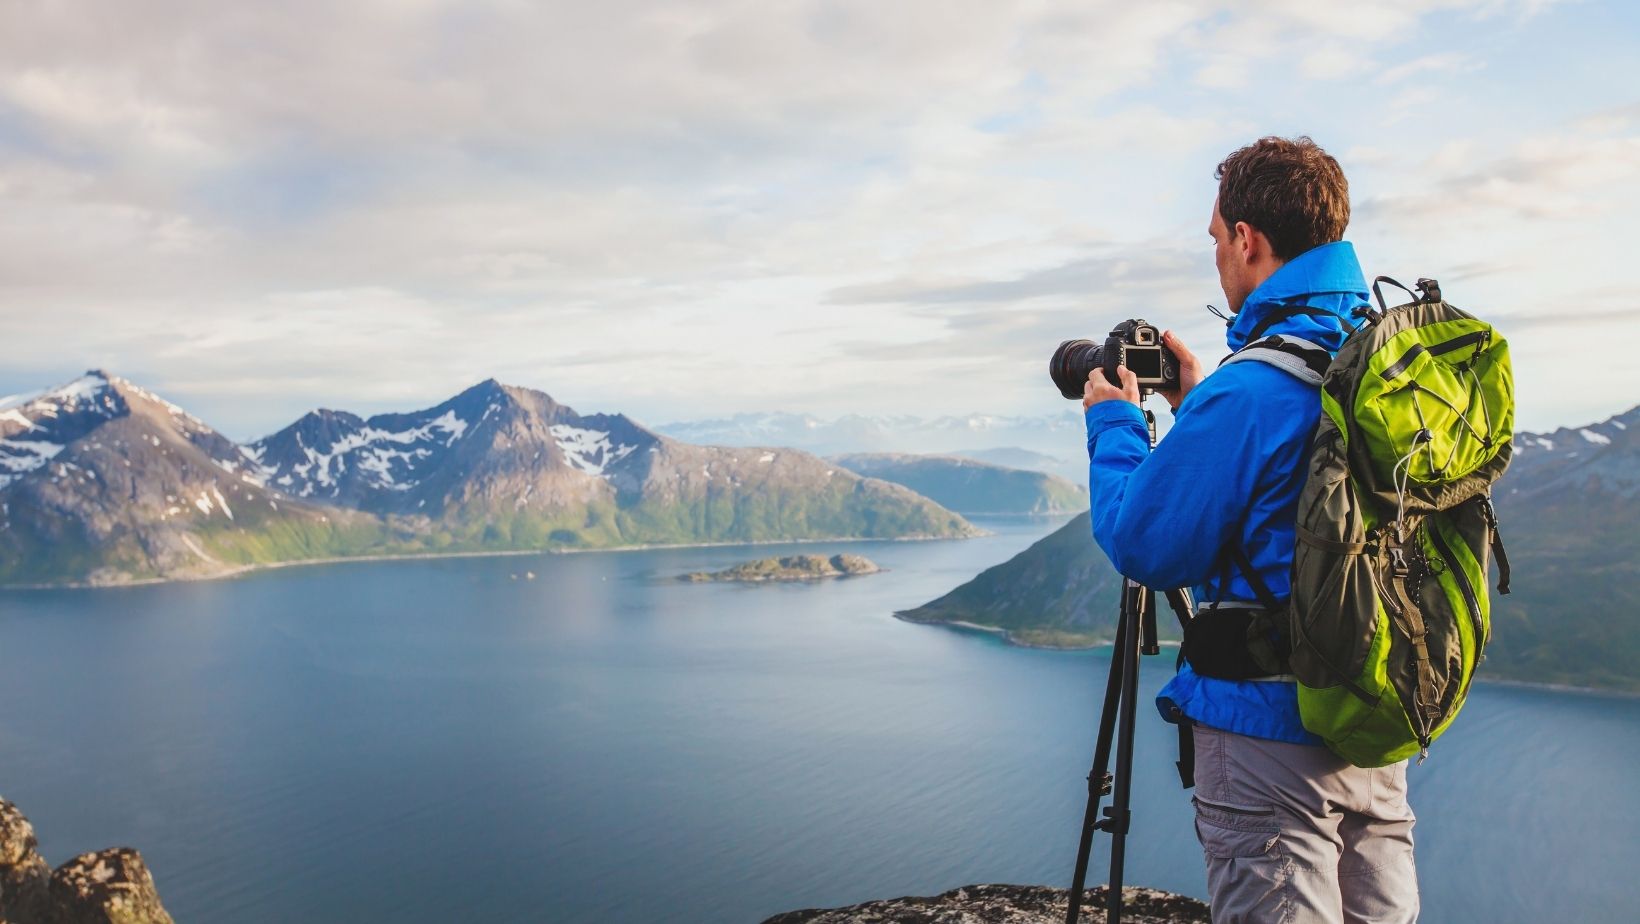 Man taking a photo of mountains with a DSLR camera